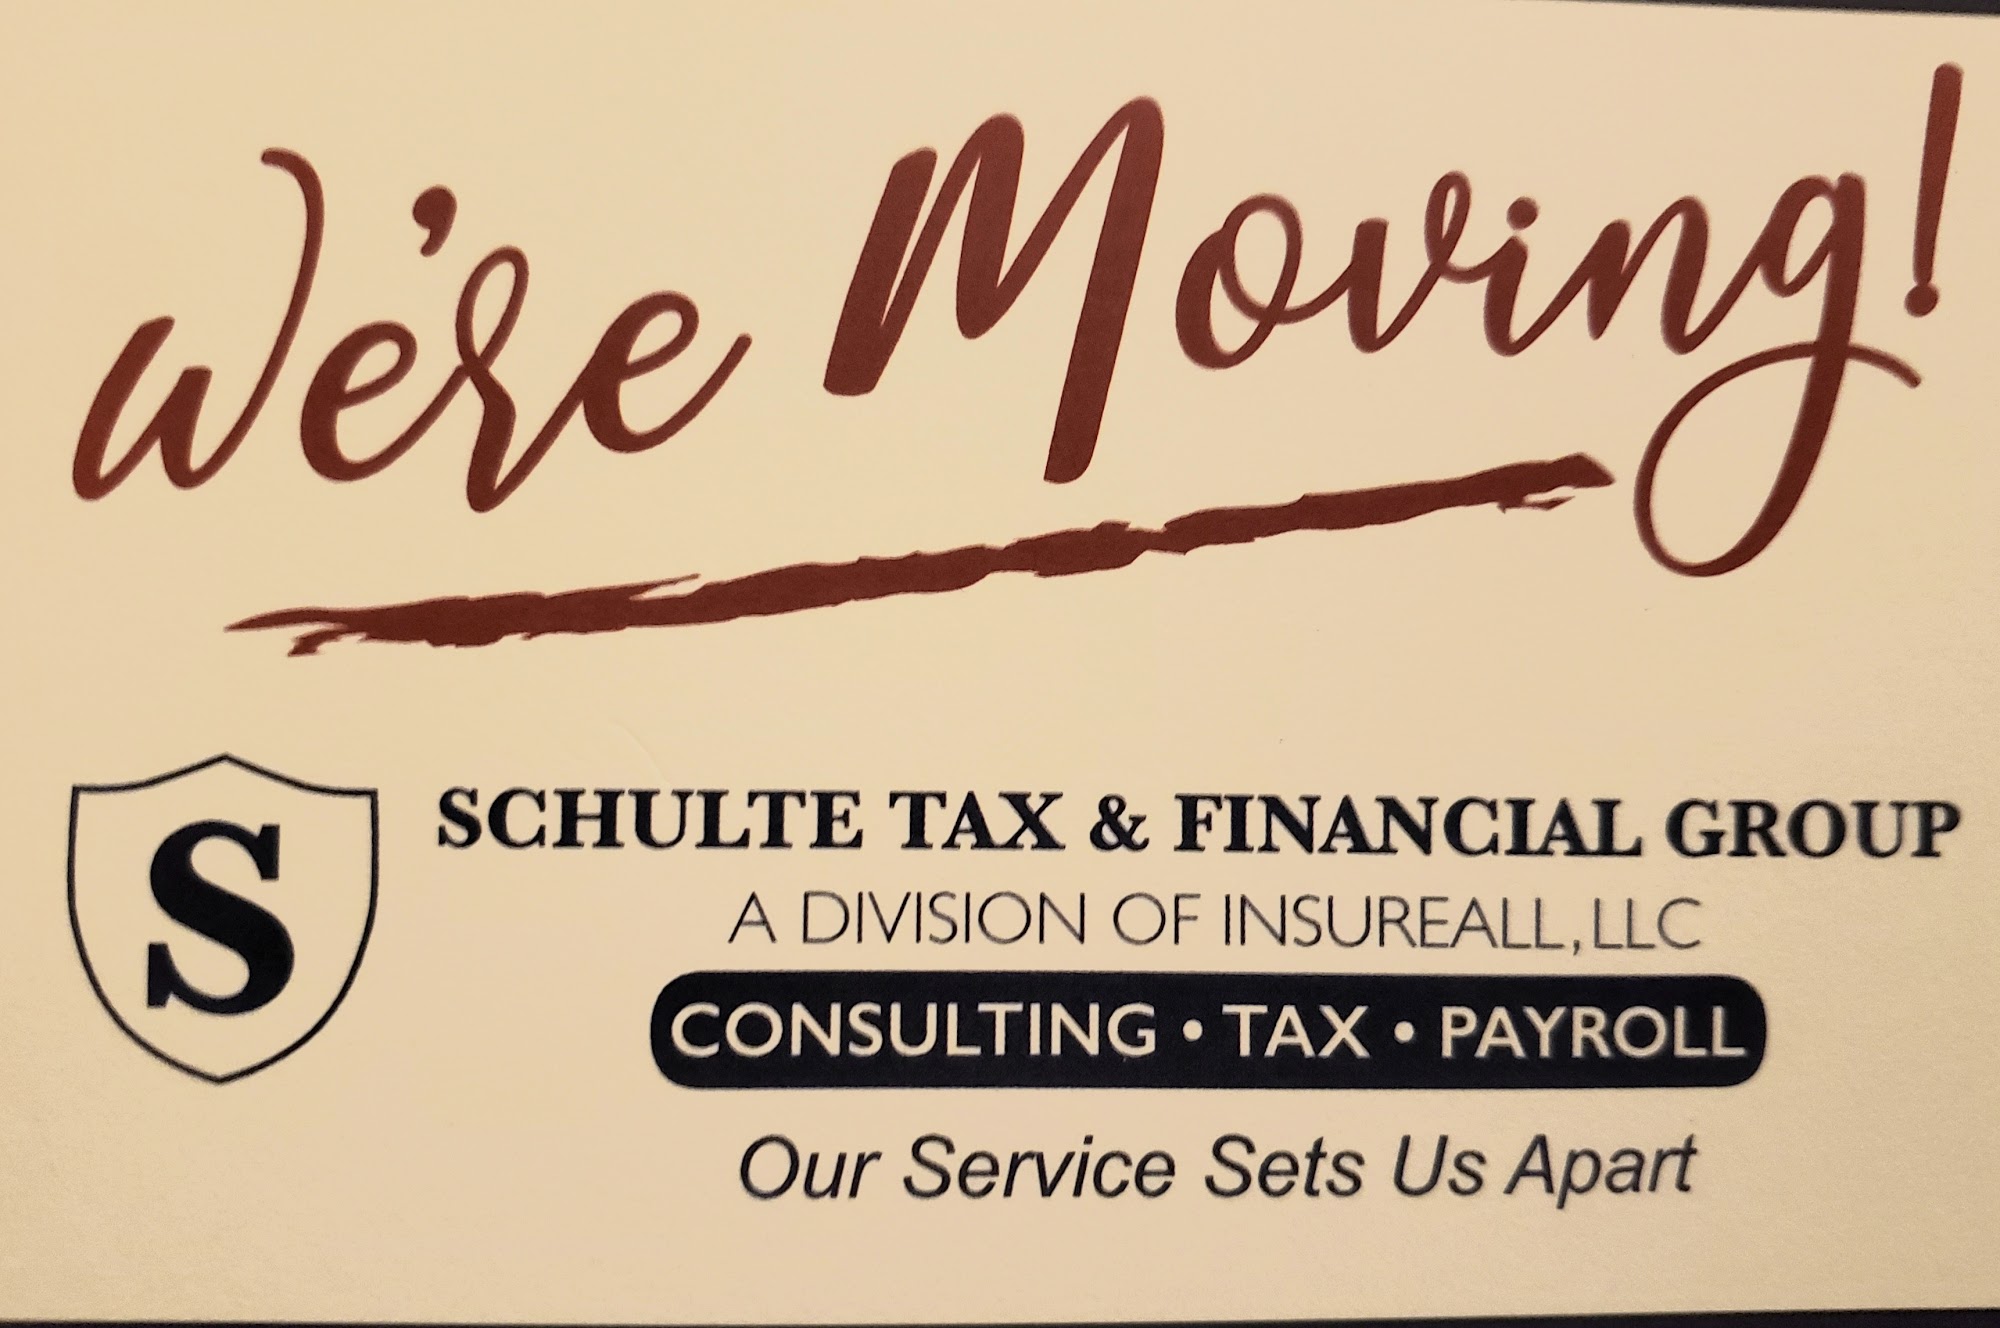 Schulte Tax and Financial Group 801 IN-161, Rockport Indiana 47635